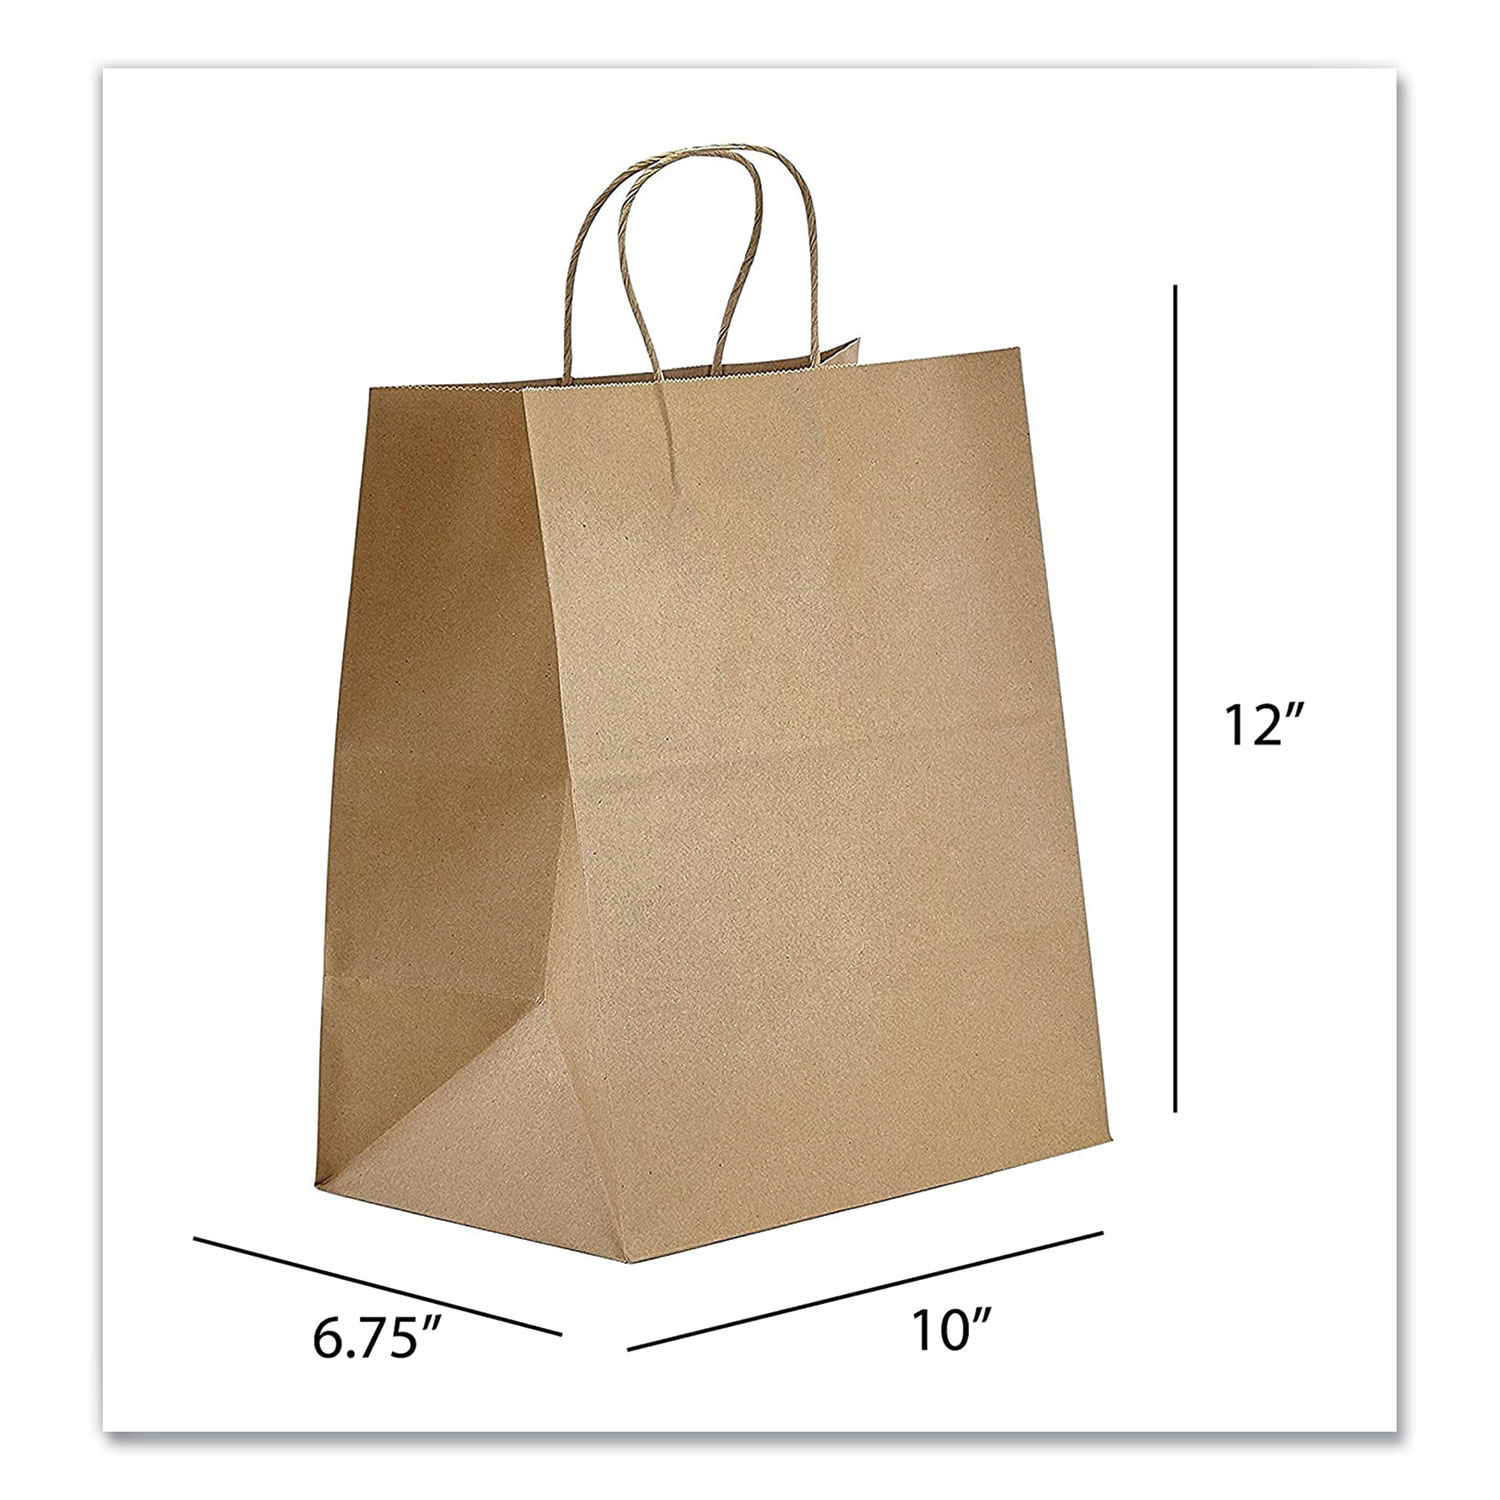  Prime Time Packaging NK10712 Kraft Paper Bags, Bistro, 10 x 6.75 x 12, Natural, 250/Carton (PTENK10712) 